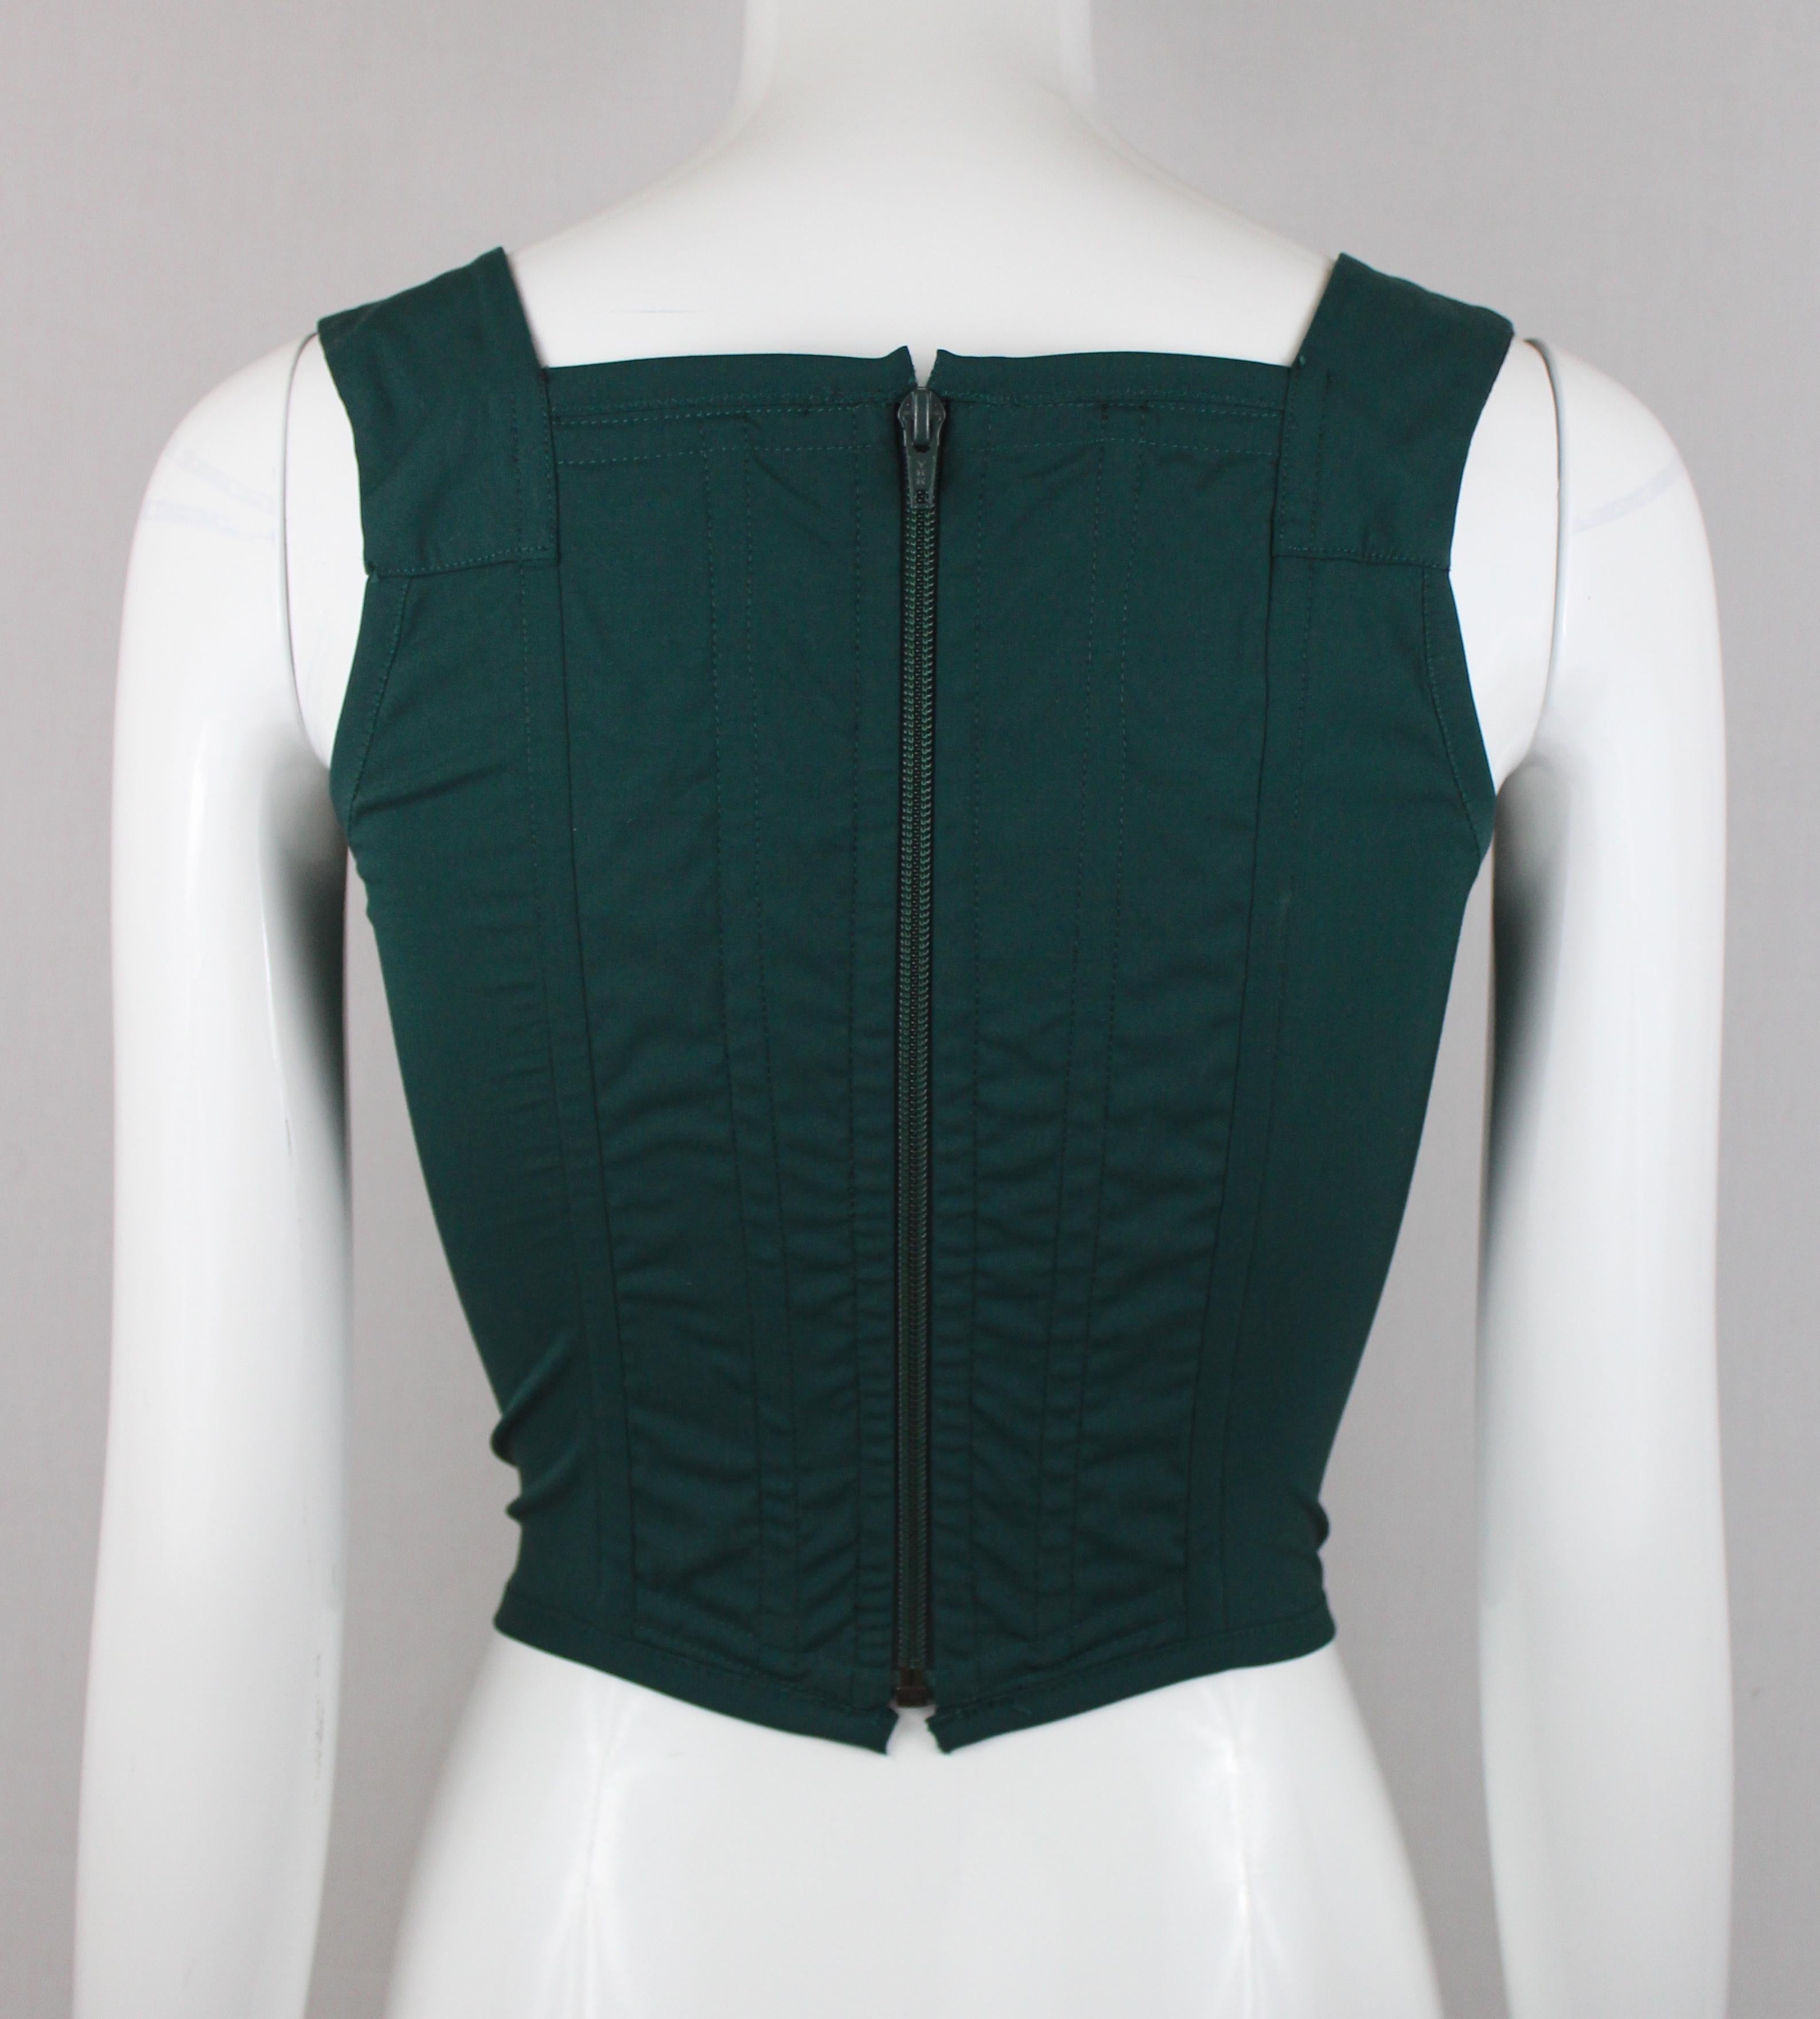 -Gorgeous corset from Vivienne Westwood, has iconic  orb logo on the breast.
-Dark green color, fabric has stretch
-Made in Italy
-Sized Italian 42, corresponds with a 4/6 US, UK 10. 

Approximate Measurements 
-Total length: 18